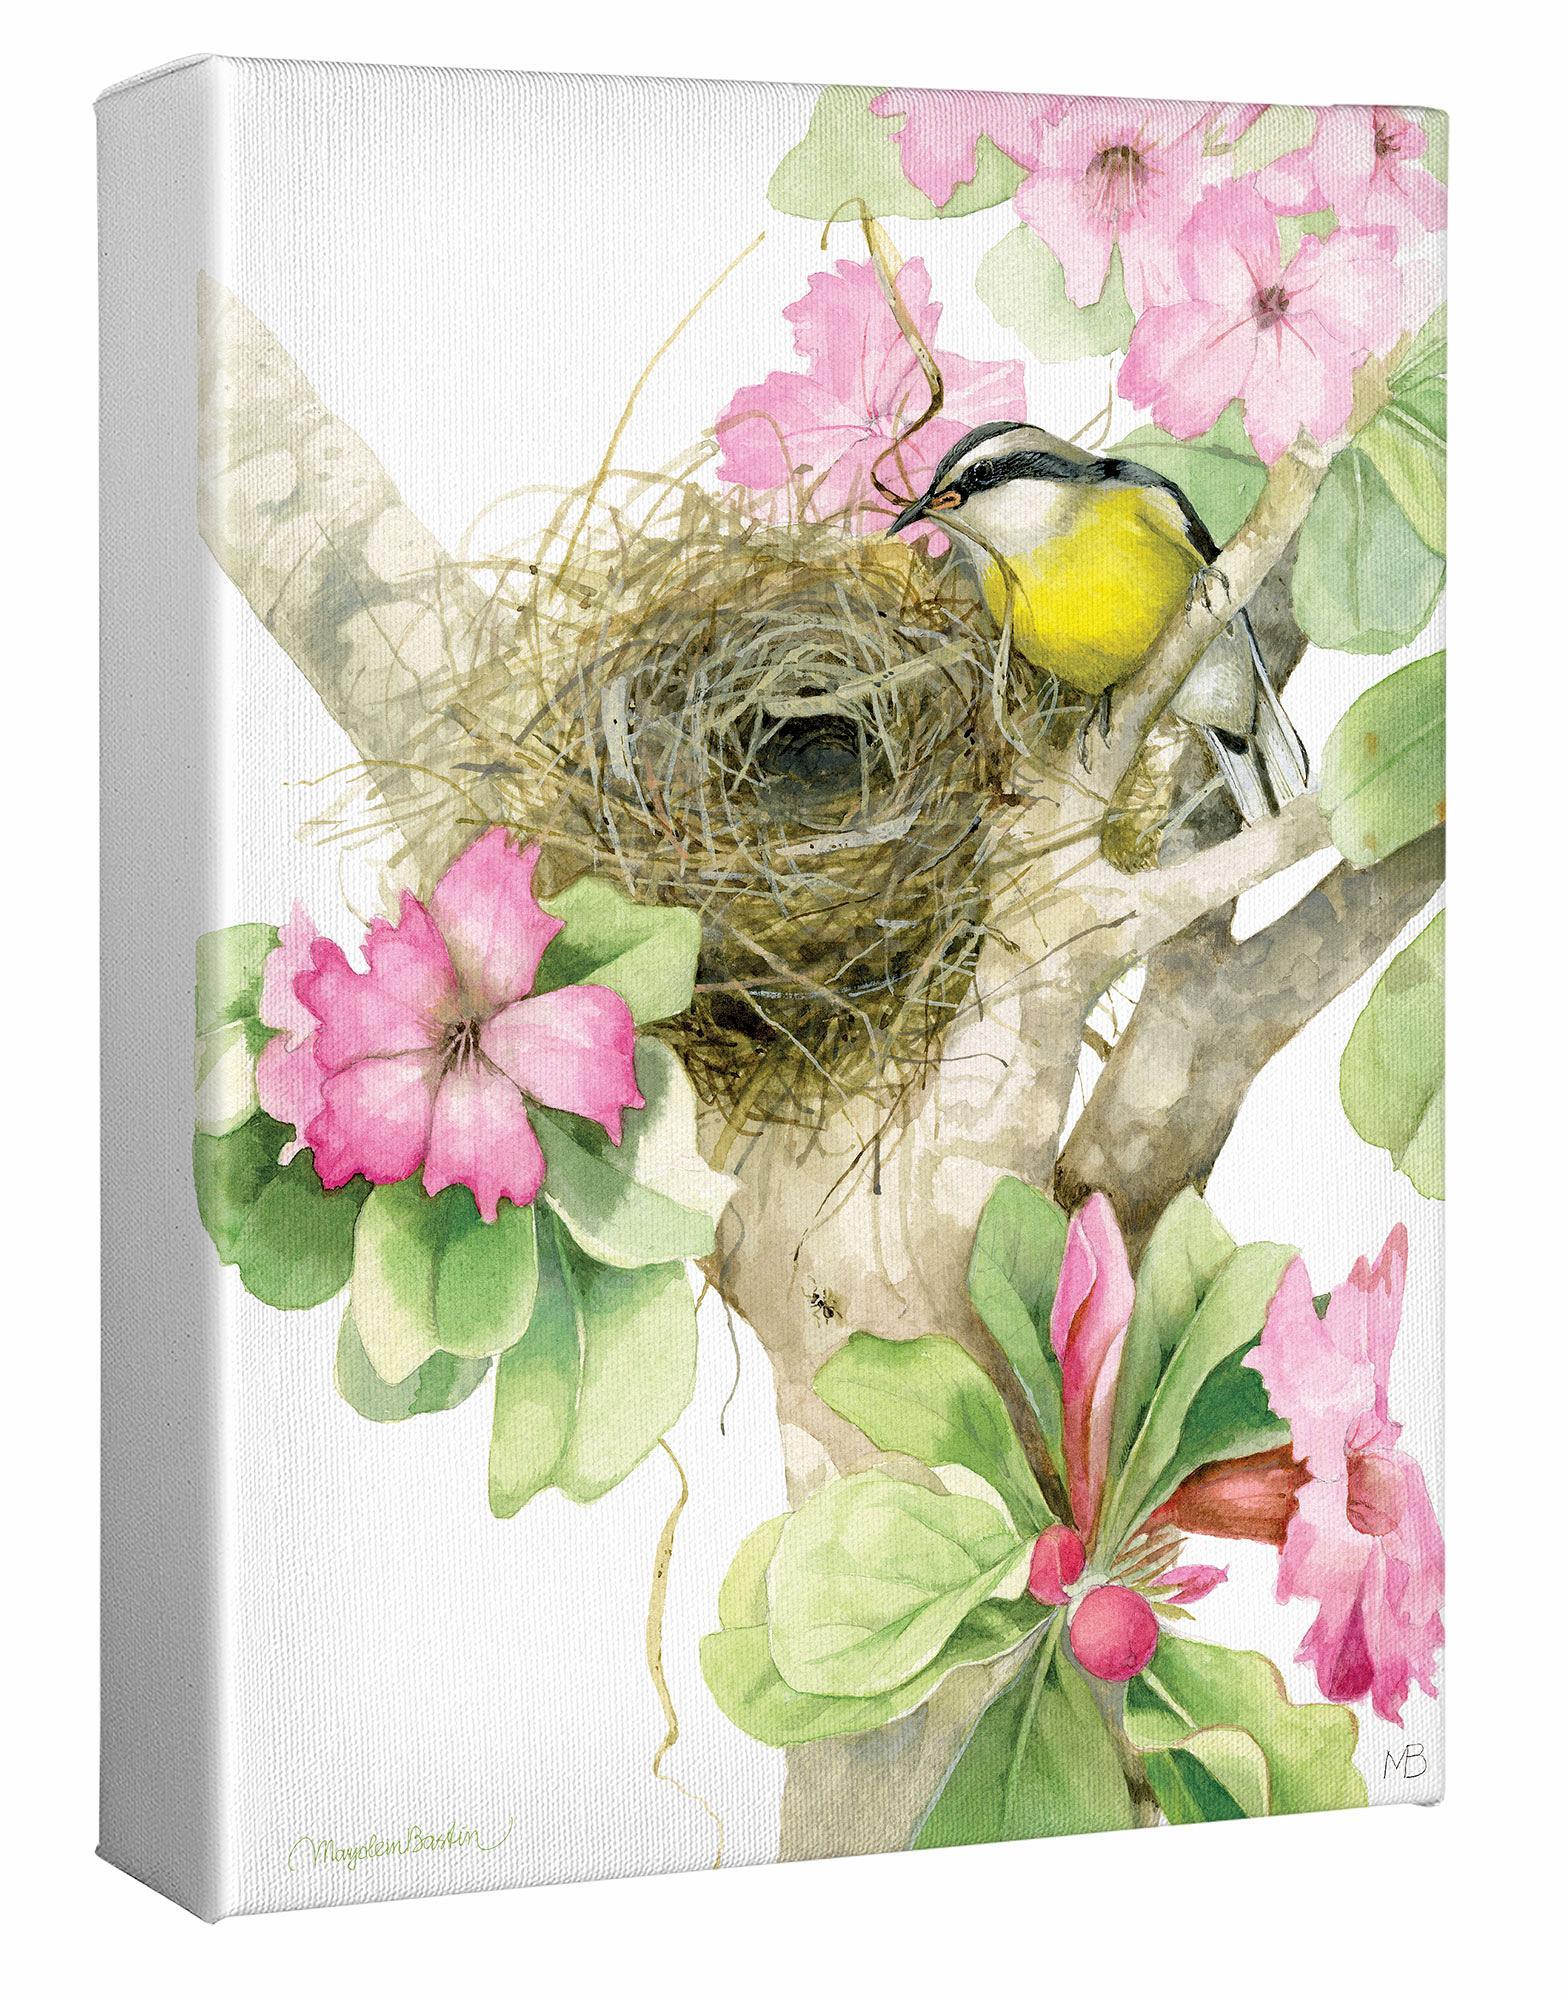 Building a Tropical Home Gallery Wrapped Canvas - Wild Wings